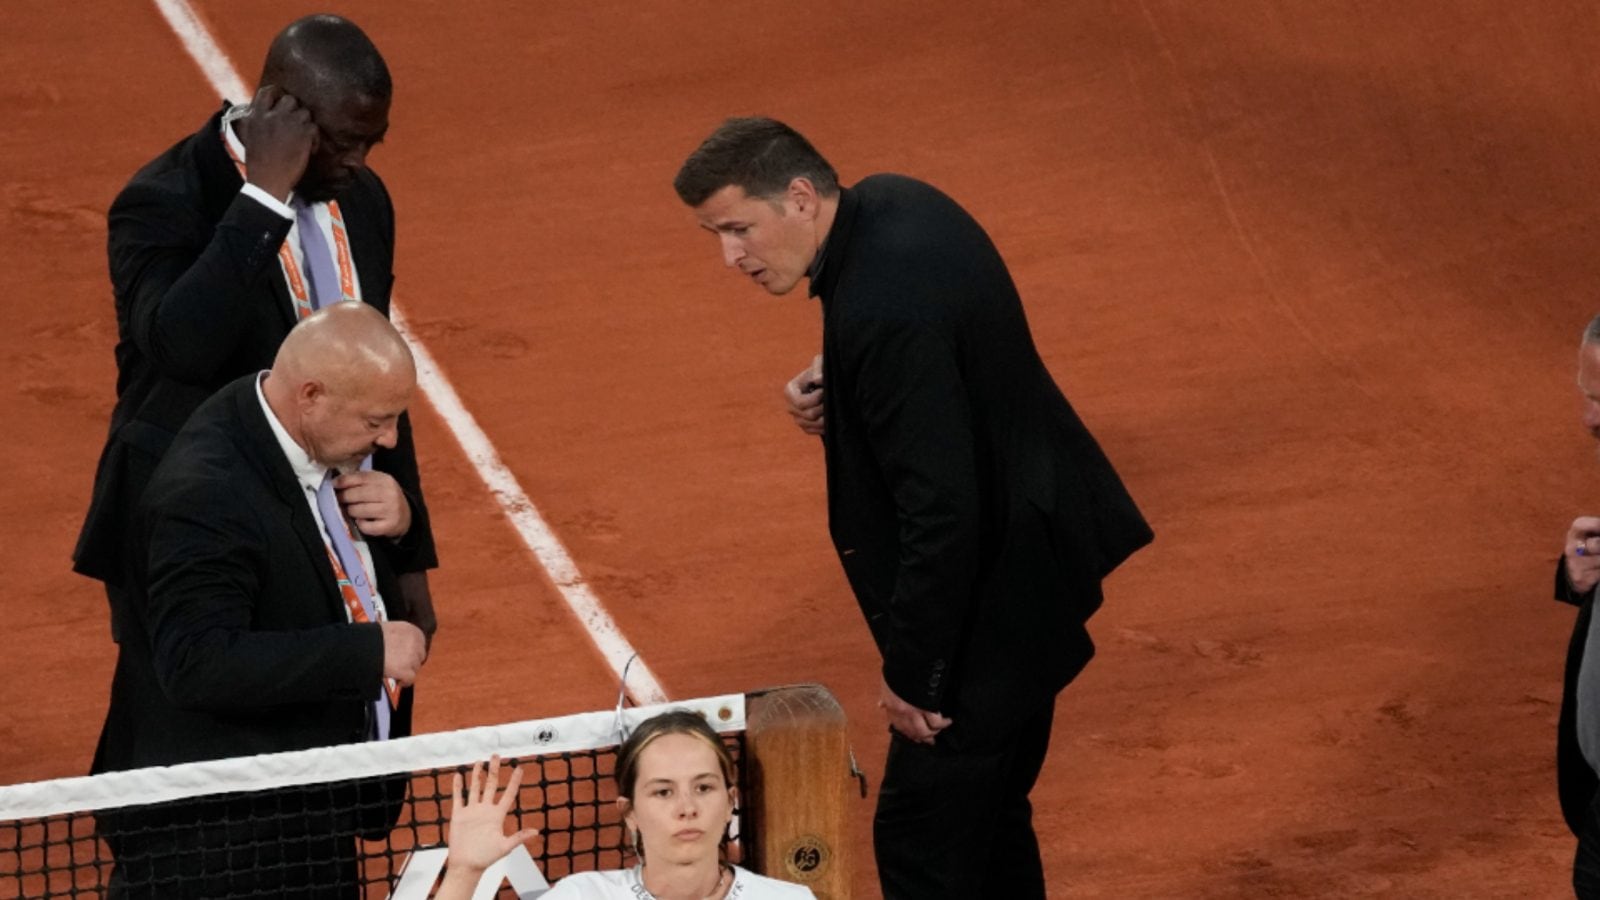 French Open 2022 Casper Ruud vs Marin Cilic Interrupted as Environmental Activist Ties Herself to Net